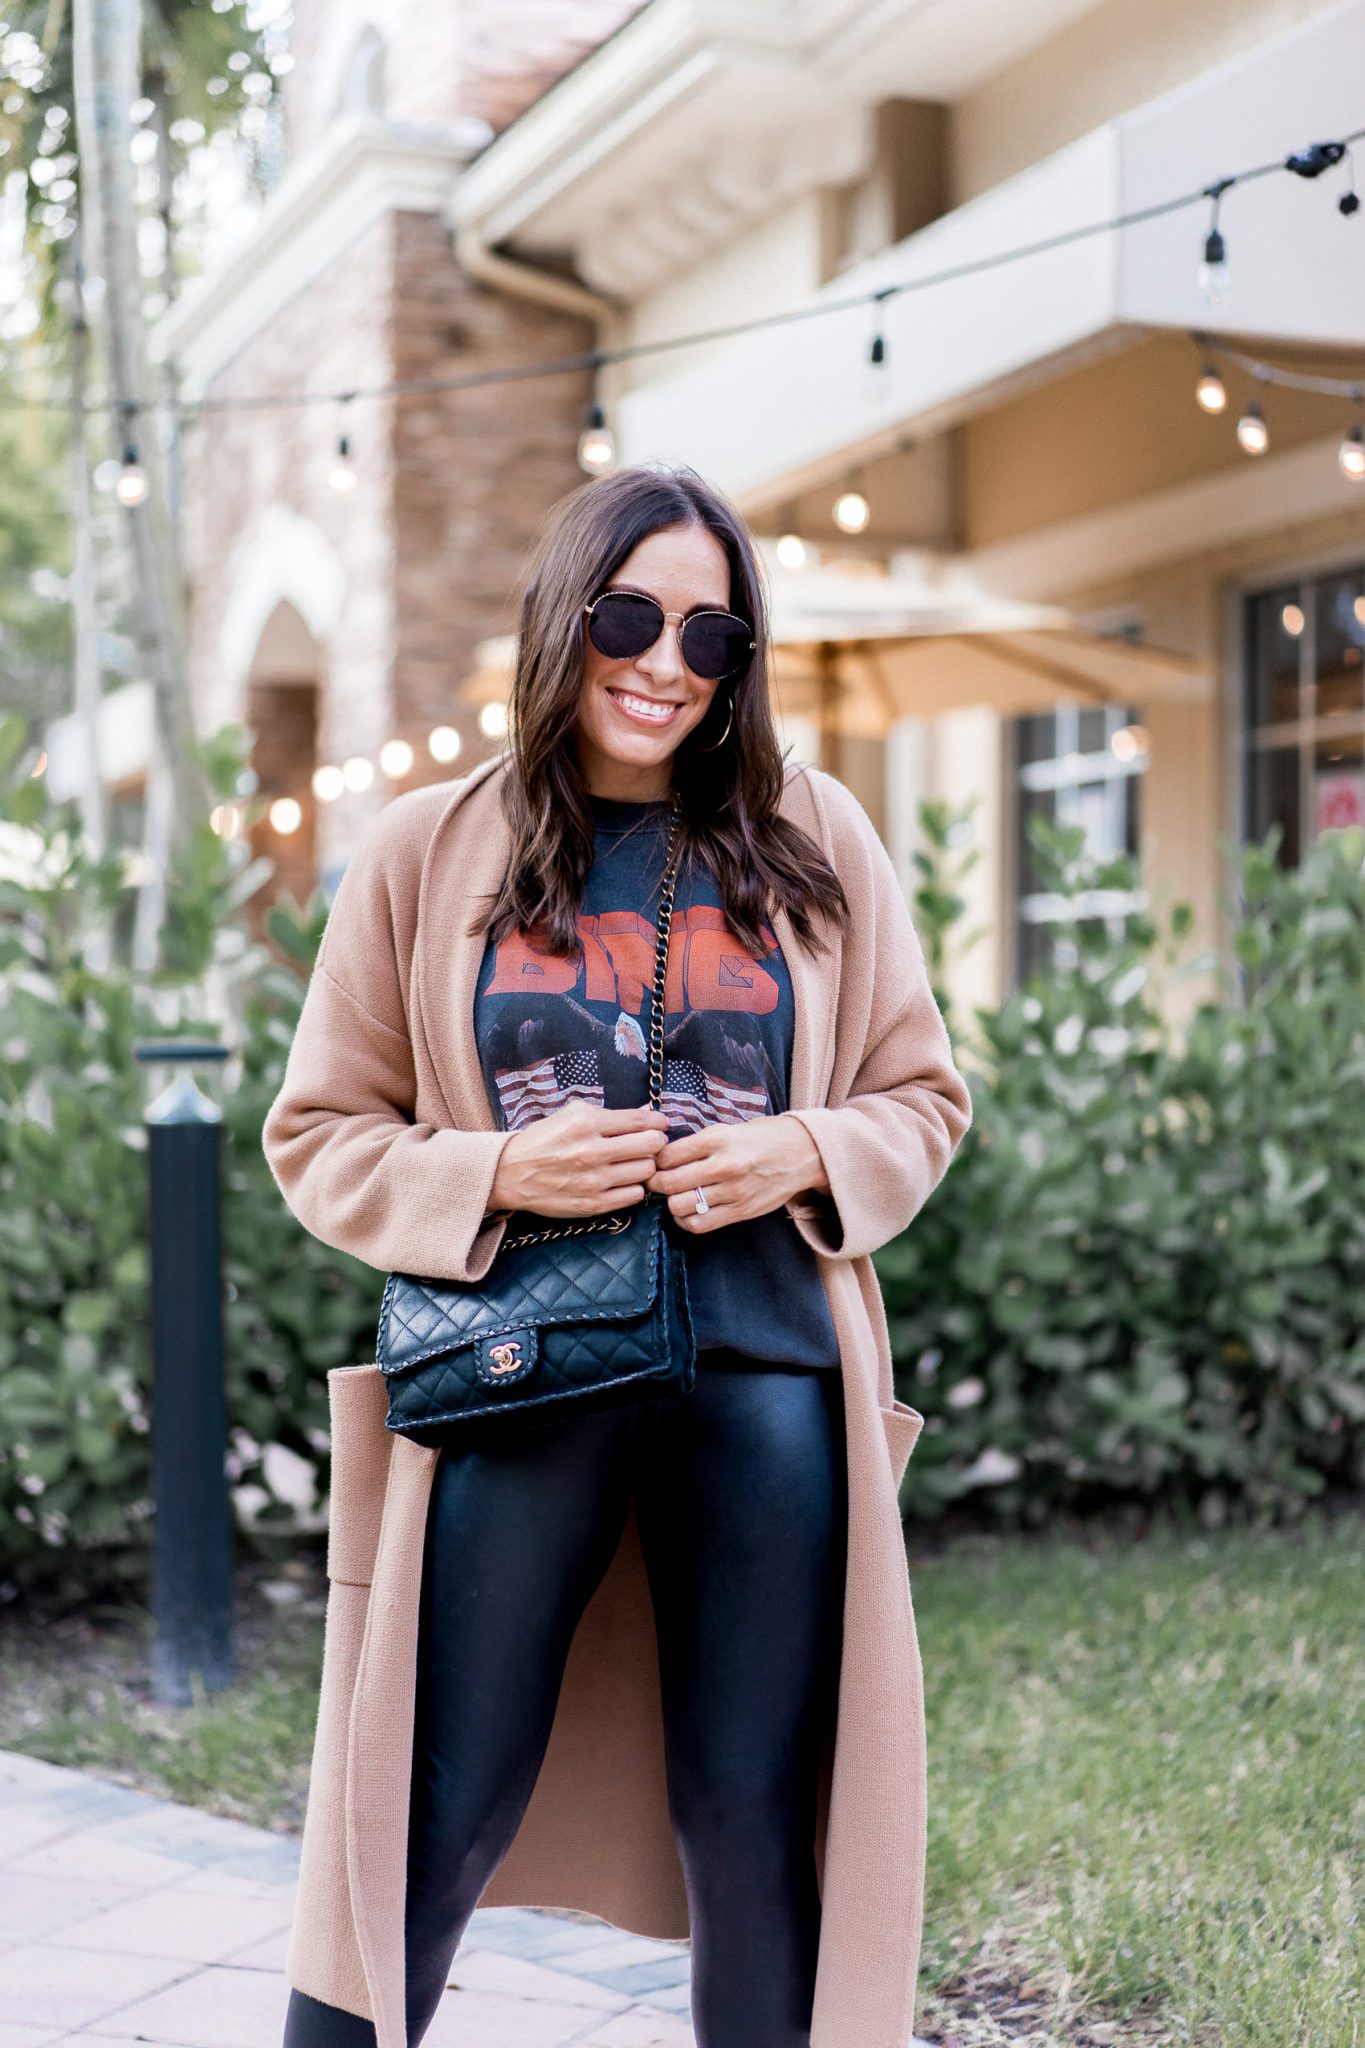 Le Fashion: Anine Bing Shows A Casual Cool Way To Wear Suede For Fall